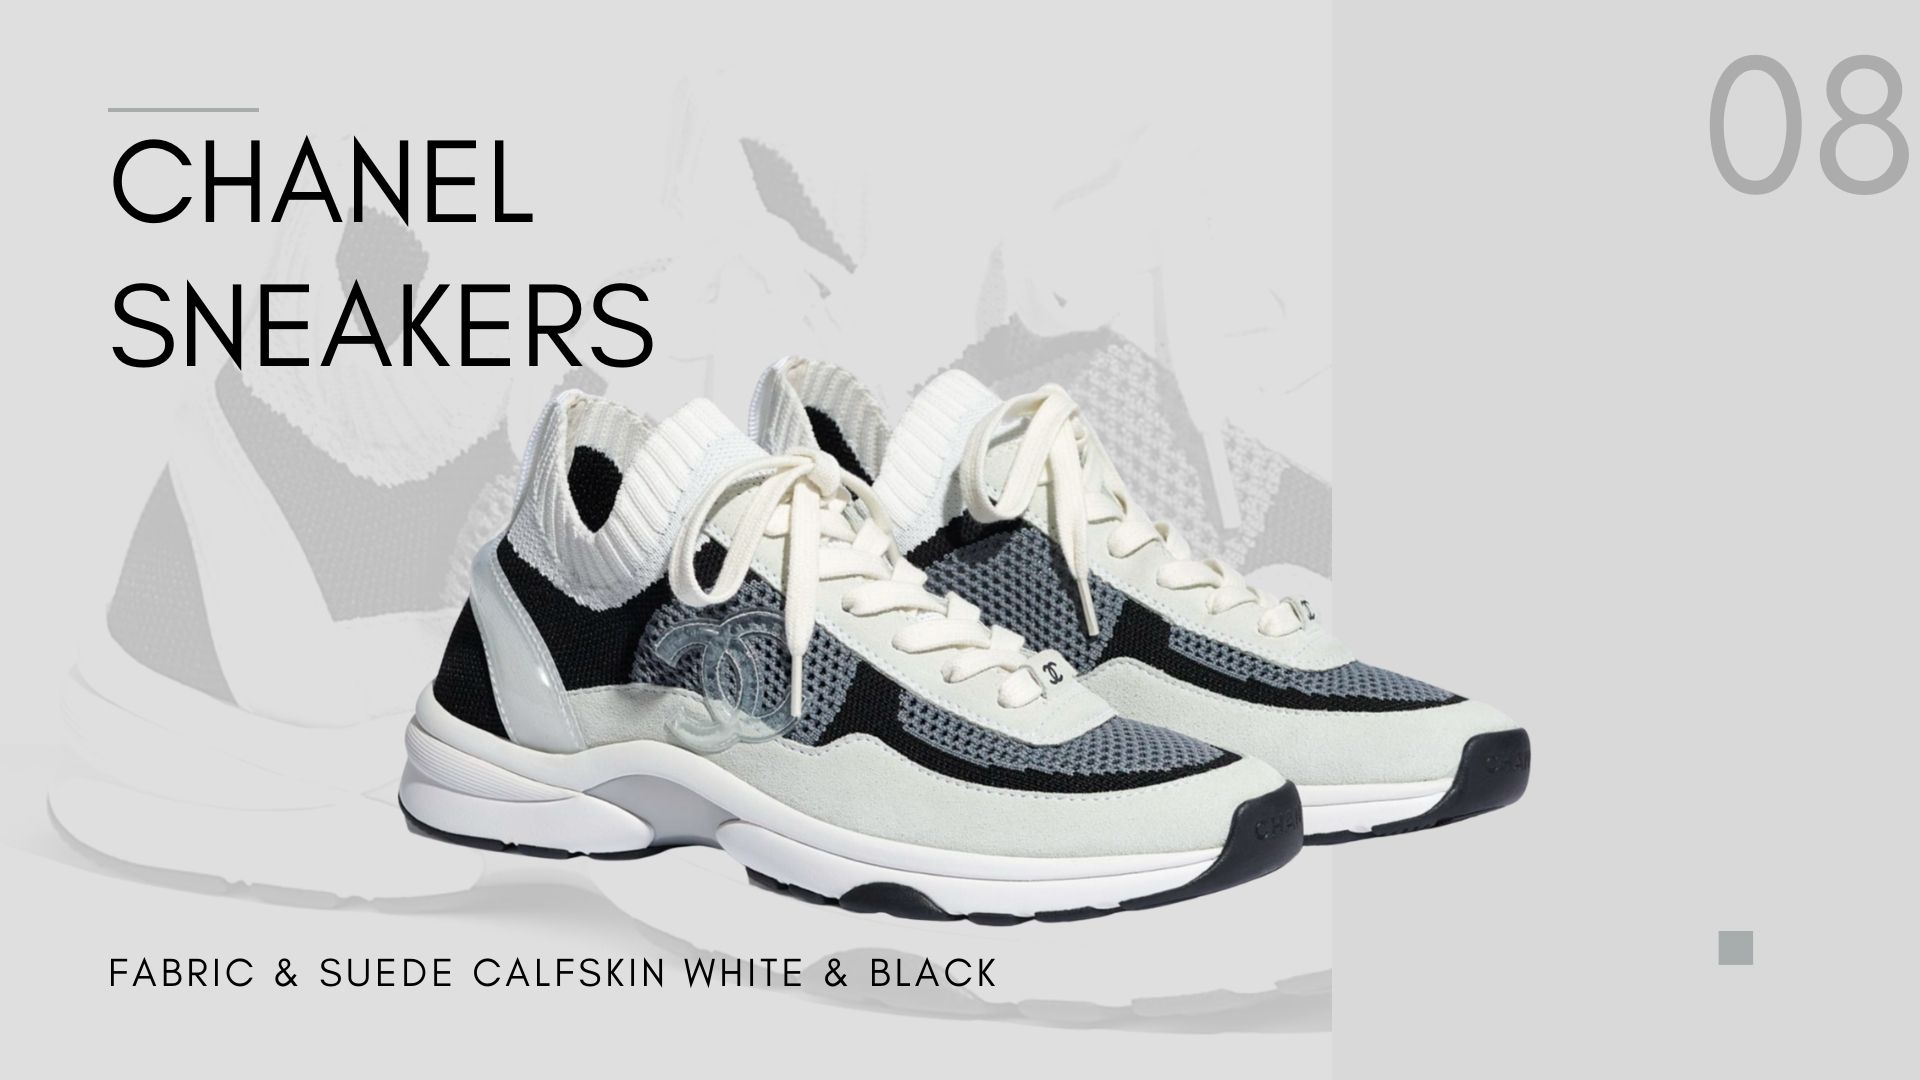 Sneakers Fabric & Suede Calfskin White & Black